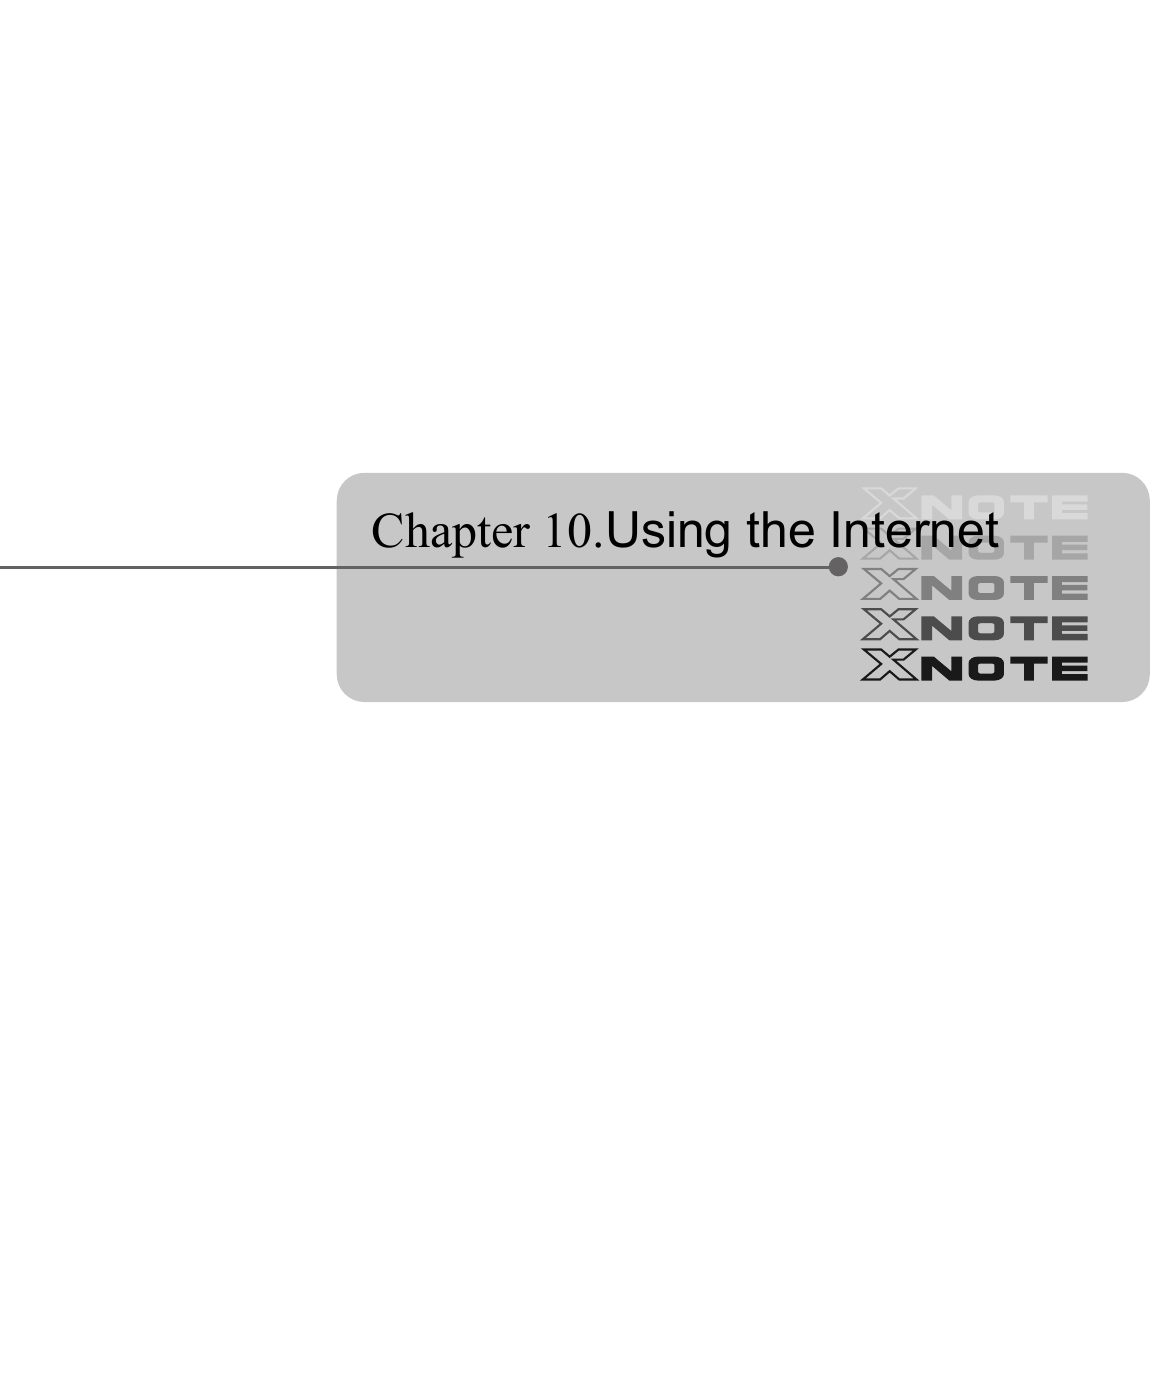  Chapter 10.Using the Internet